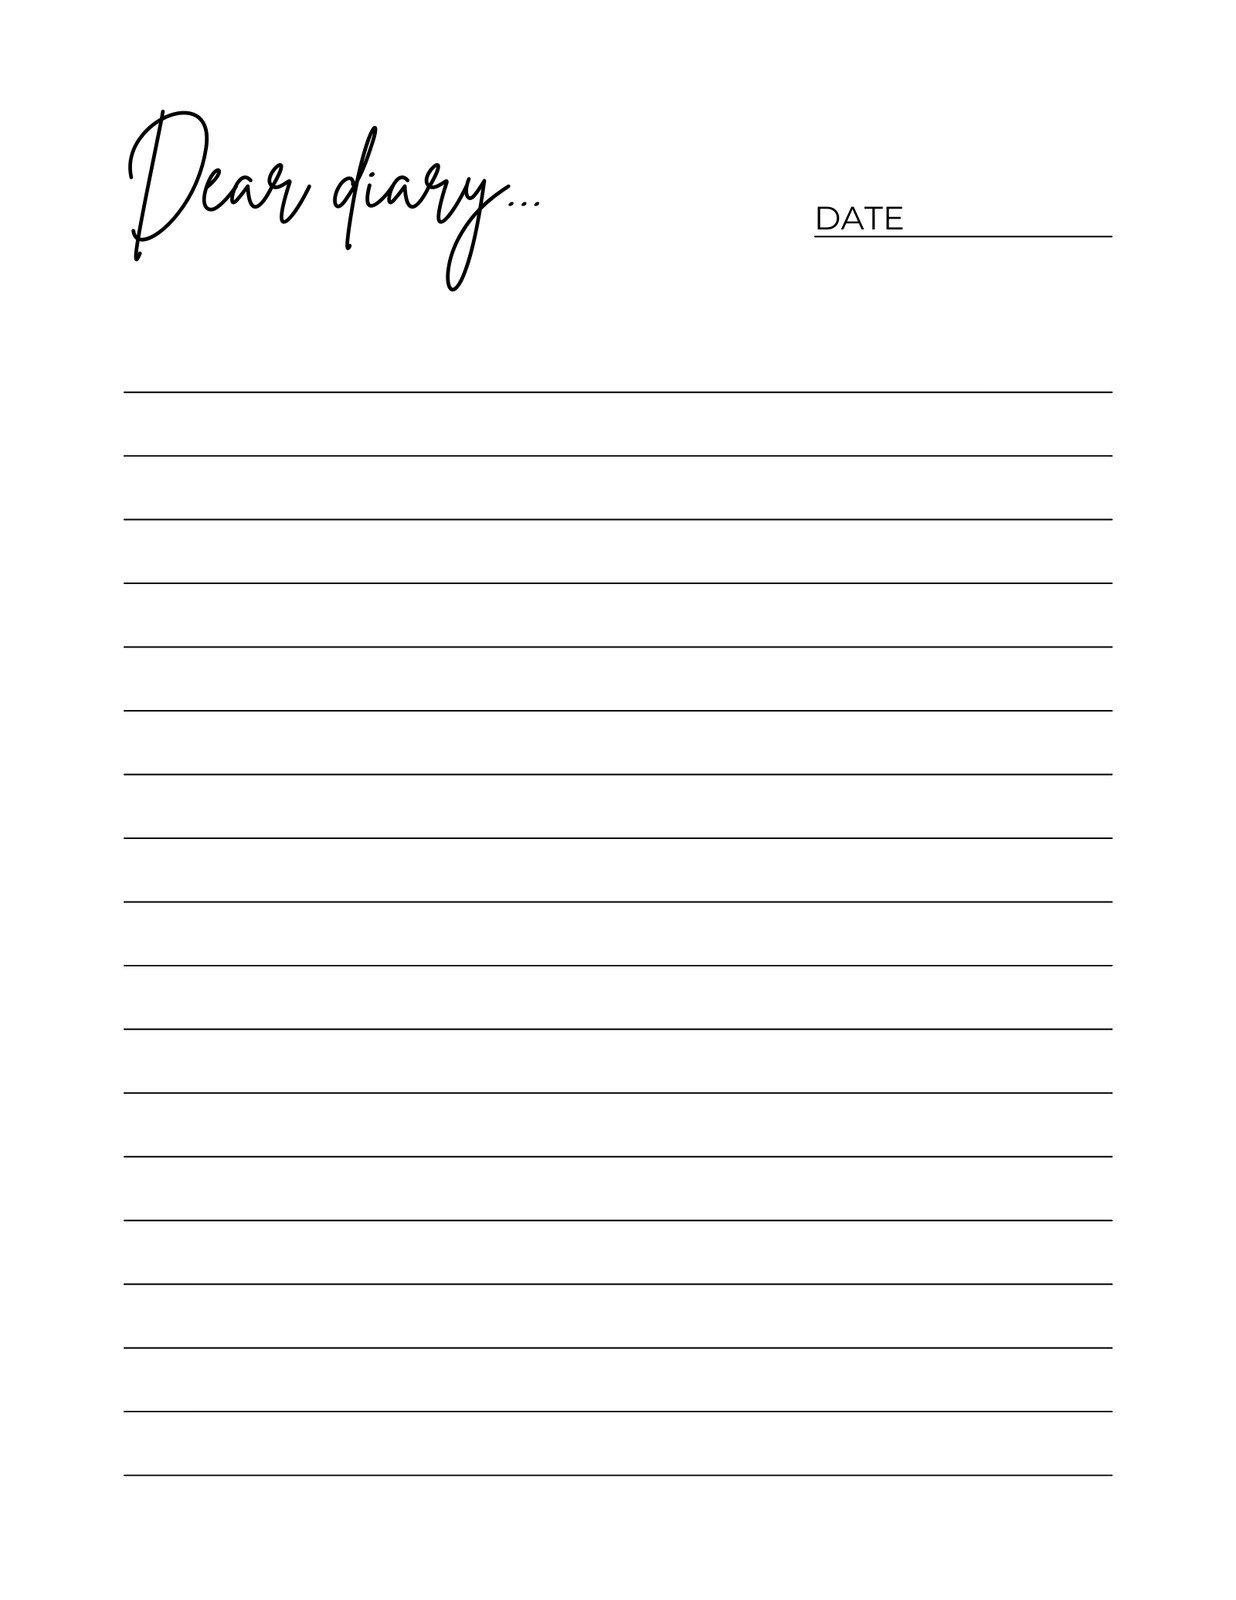 Free Printable Diary Templates You Can Customize | Canva - Free Online Printable Journal